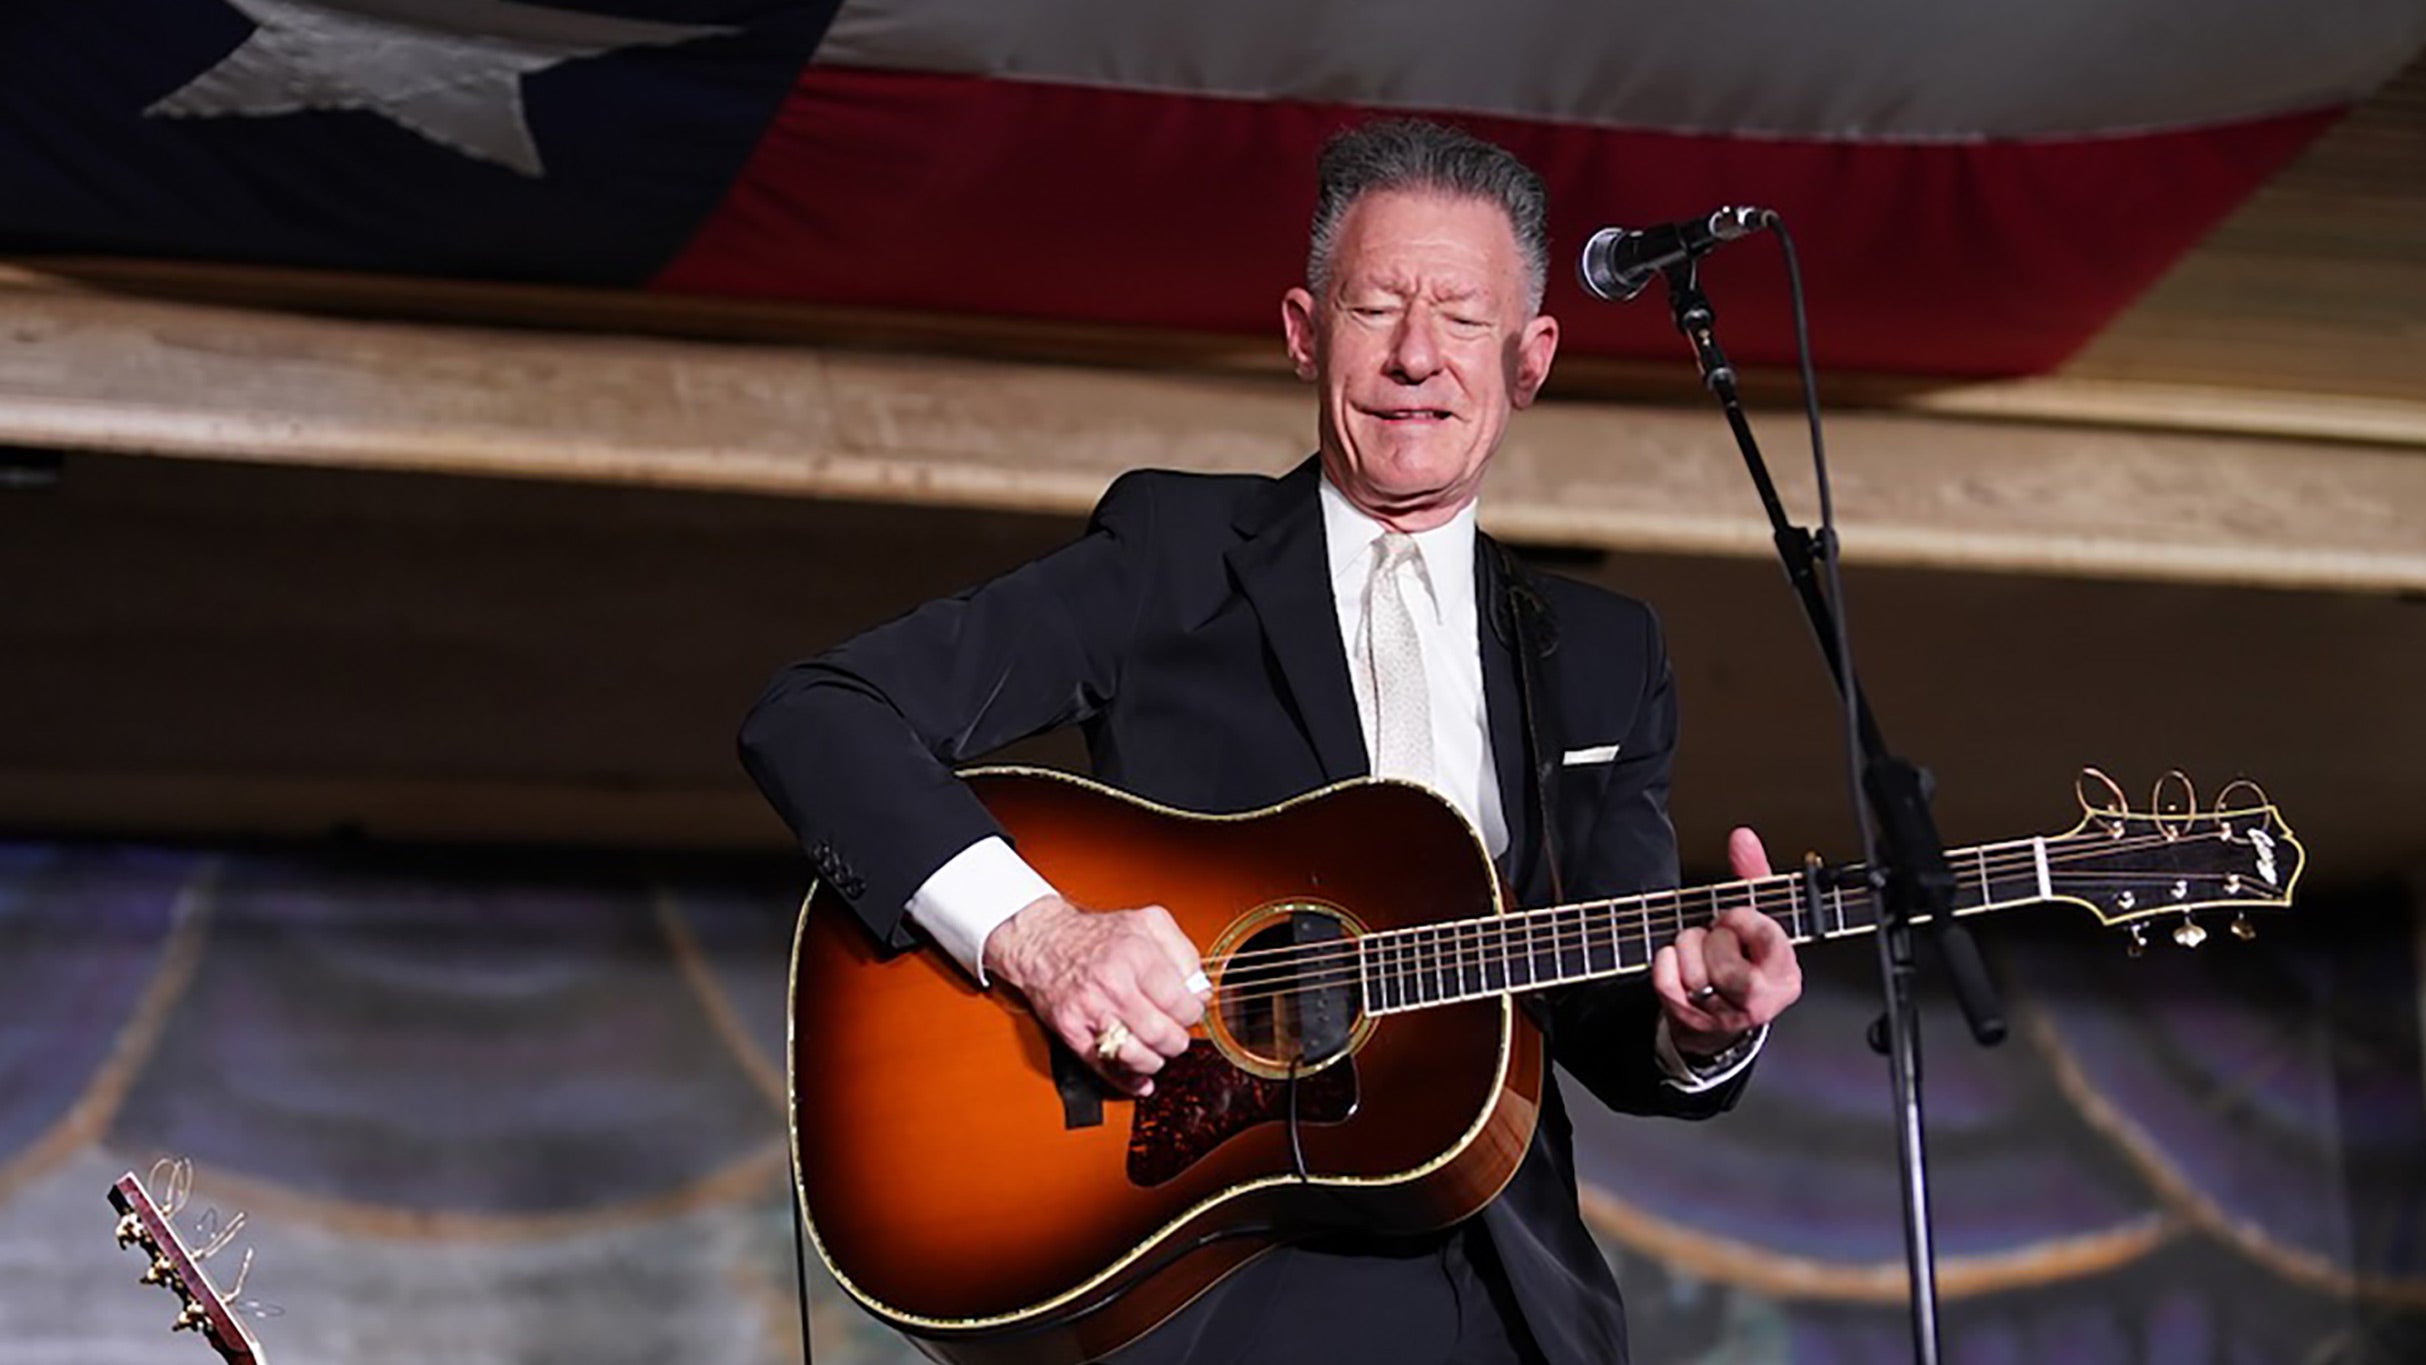 Lyle Lovett and his Acoustic Group in Corpus Christi promo photo for Official Platinum presale offer code